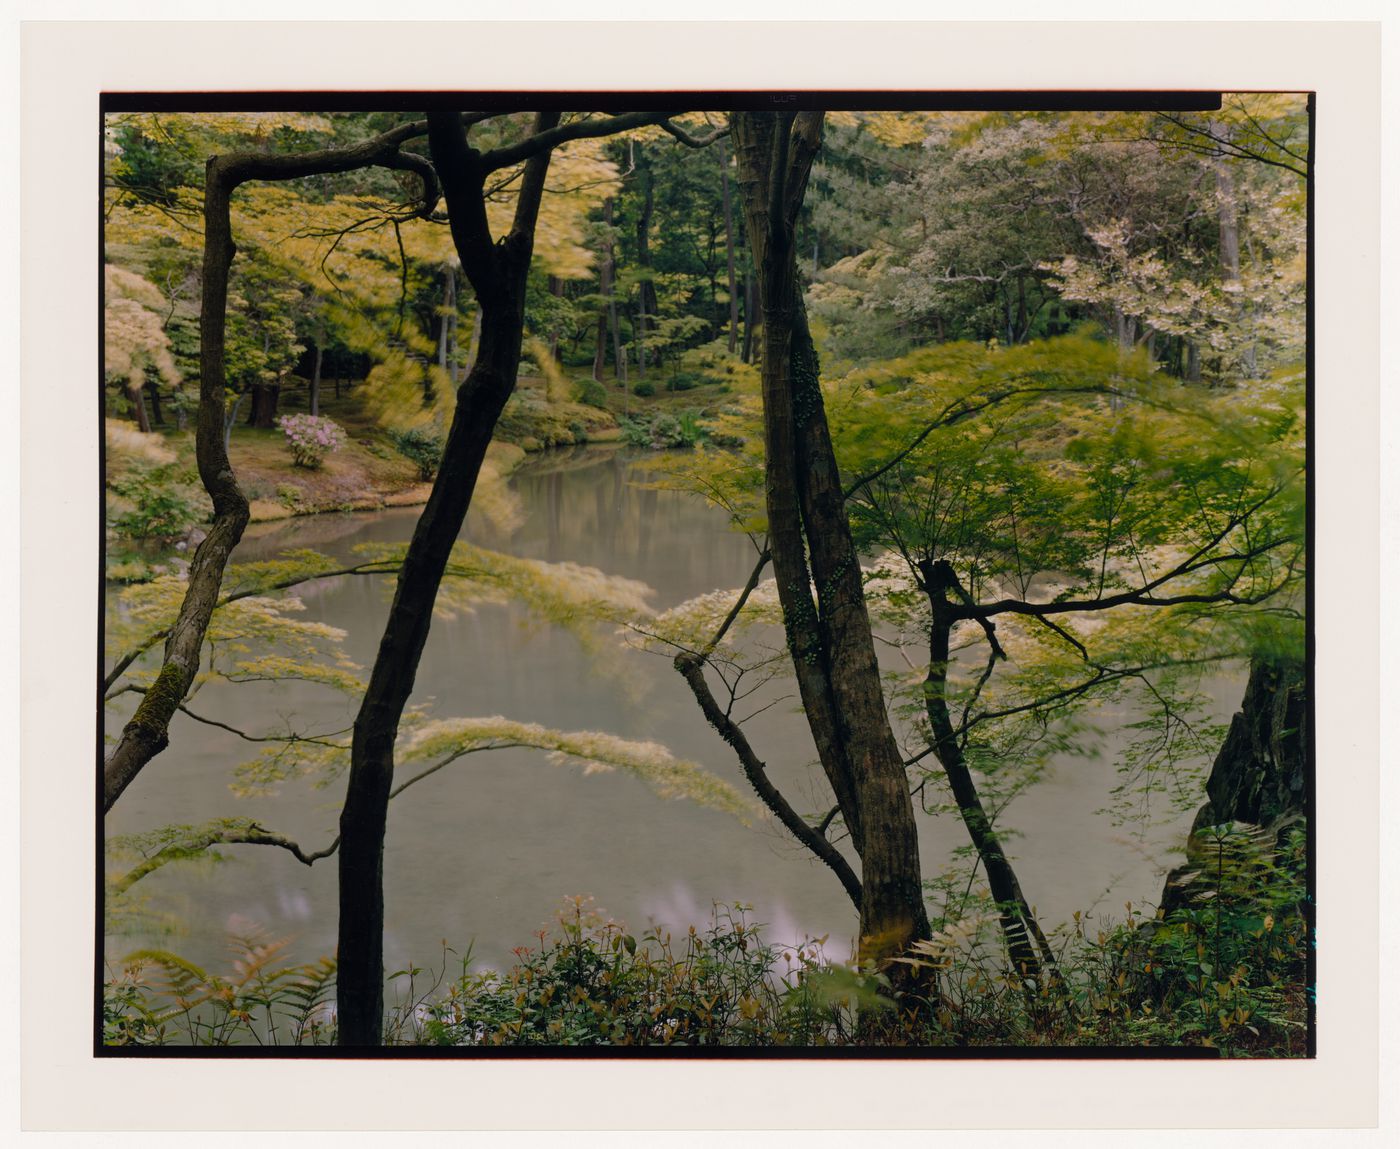 View of trees and a pond in the Moss Garden, Saihoji (also known as Kokedera [Moss Temple]), Kyoto, Japan